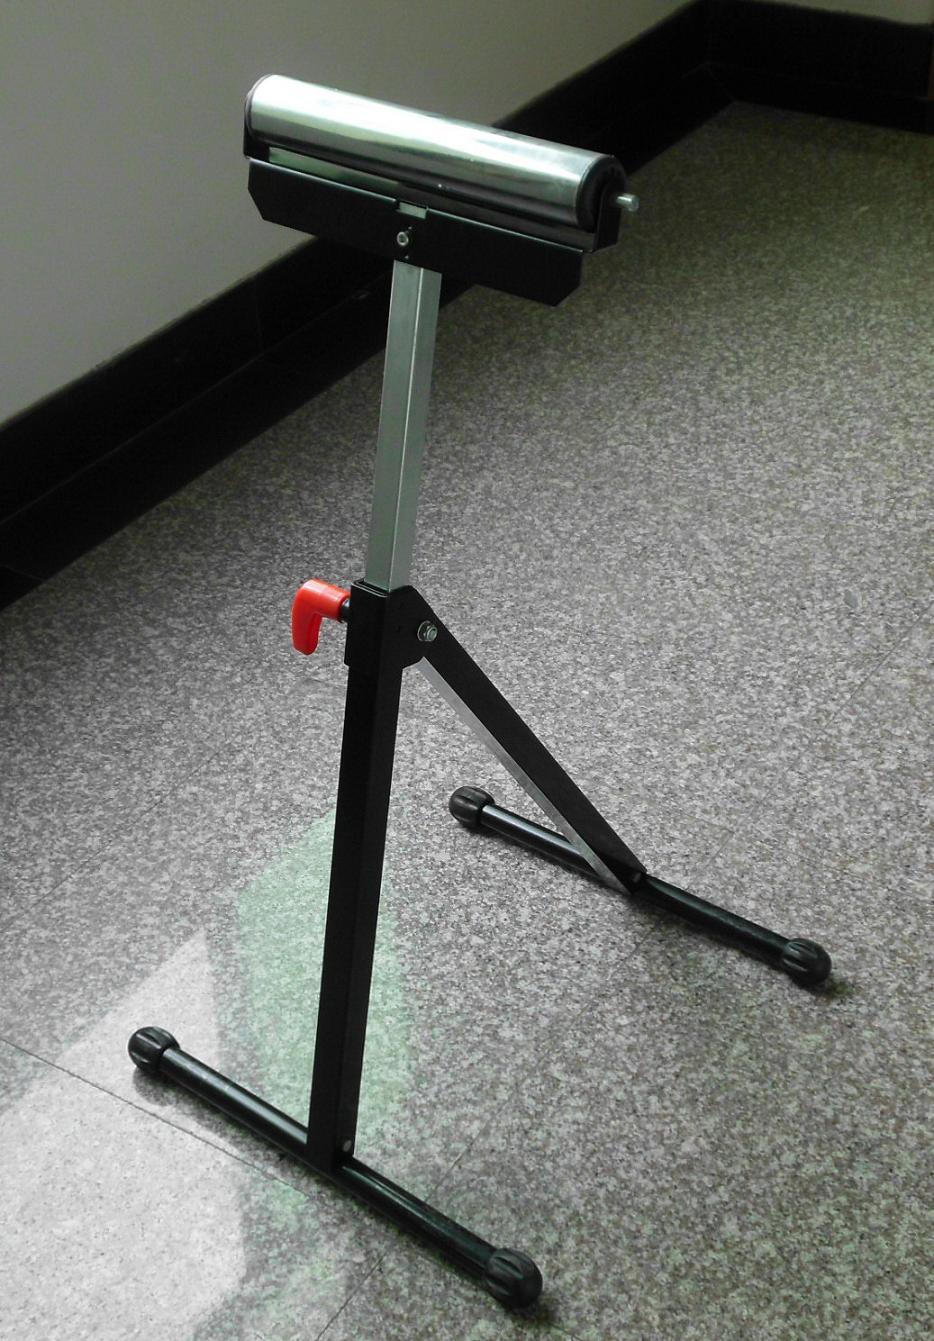 Metal Display Saw Horse Work Bench Stand for Glasses (MK-SH016B)